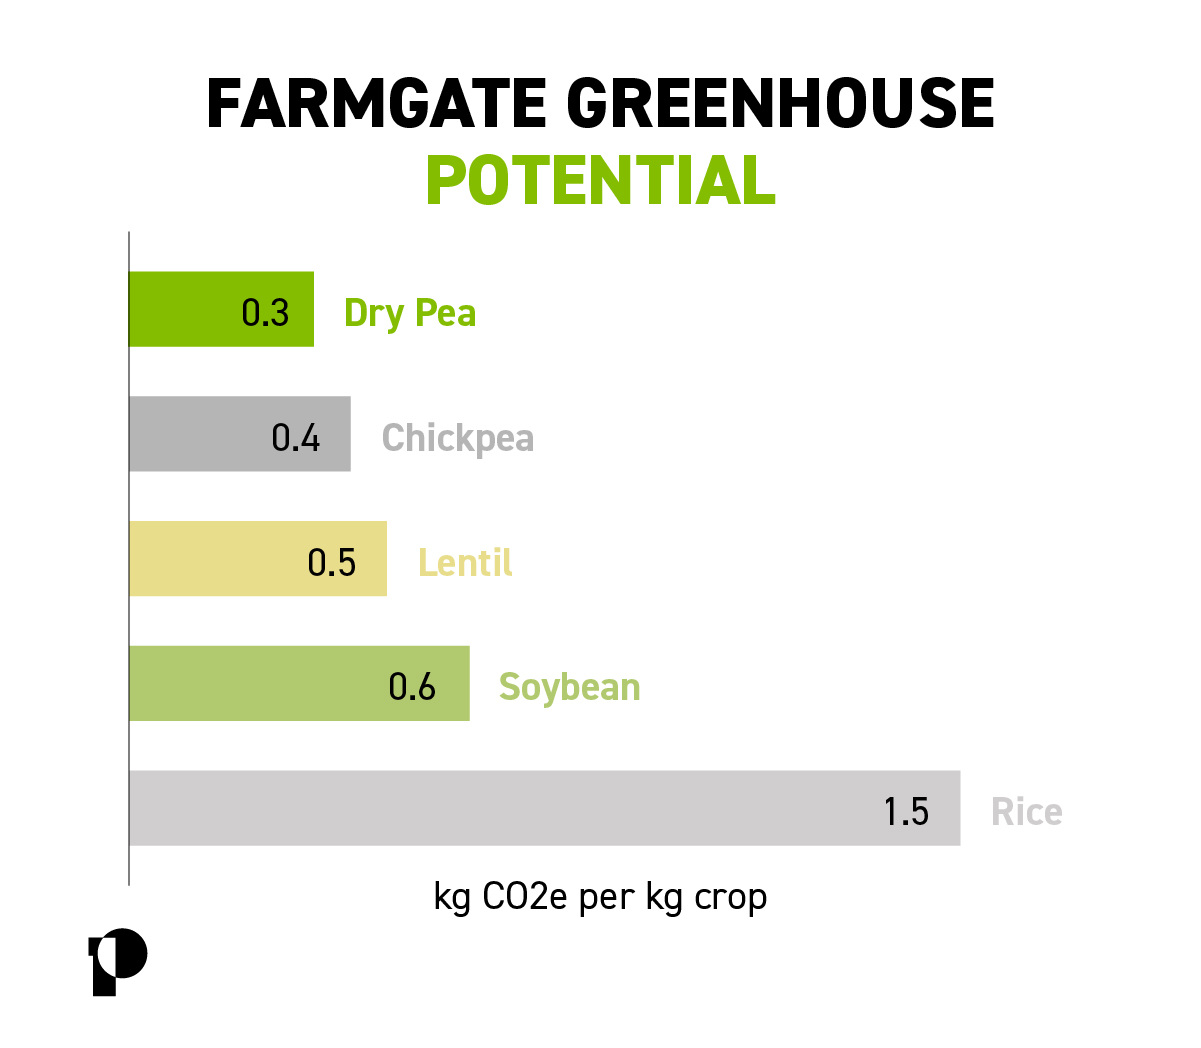 a bar chart comparing the farmgate greenhouse potential of peas, chickpeas, lentils, soybeans, and rice